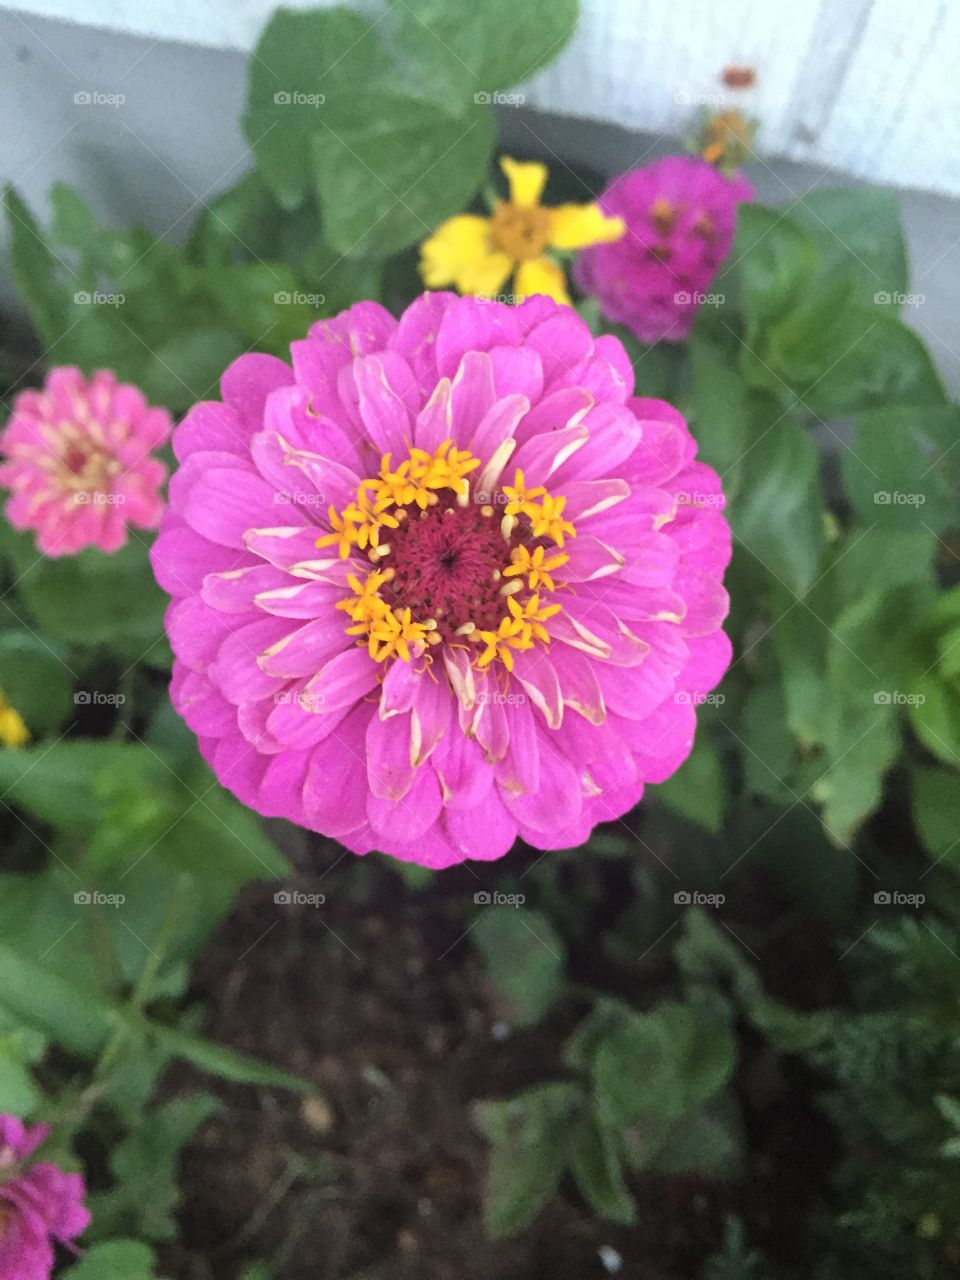 Neon pink/purple zinnia flower blooming in the springtime. Very vibrant color. 